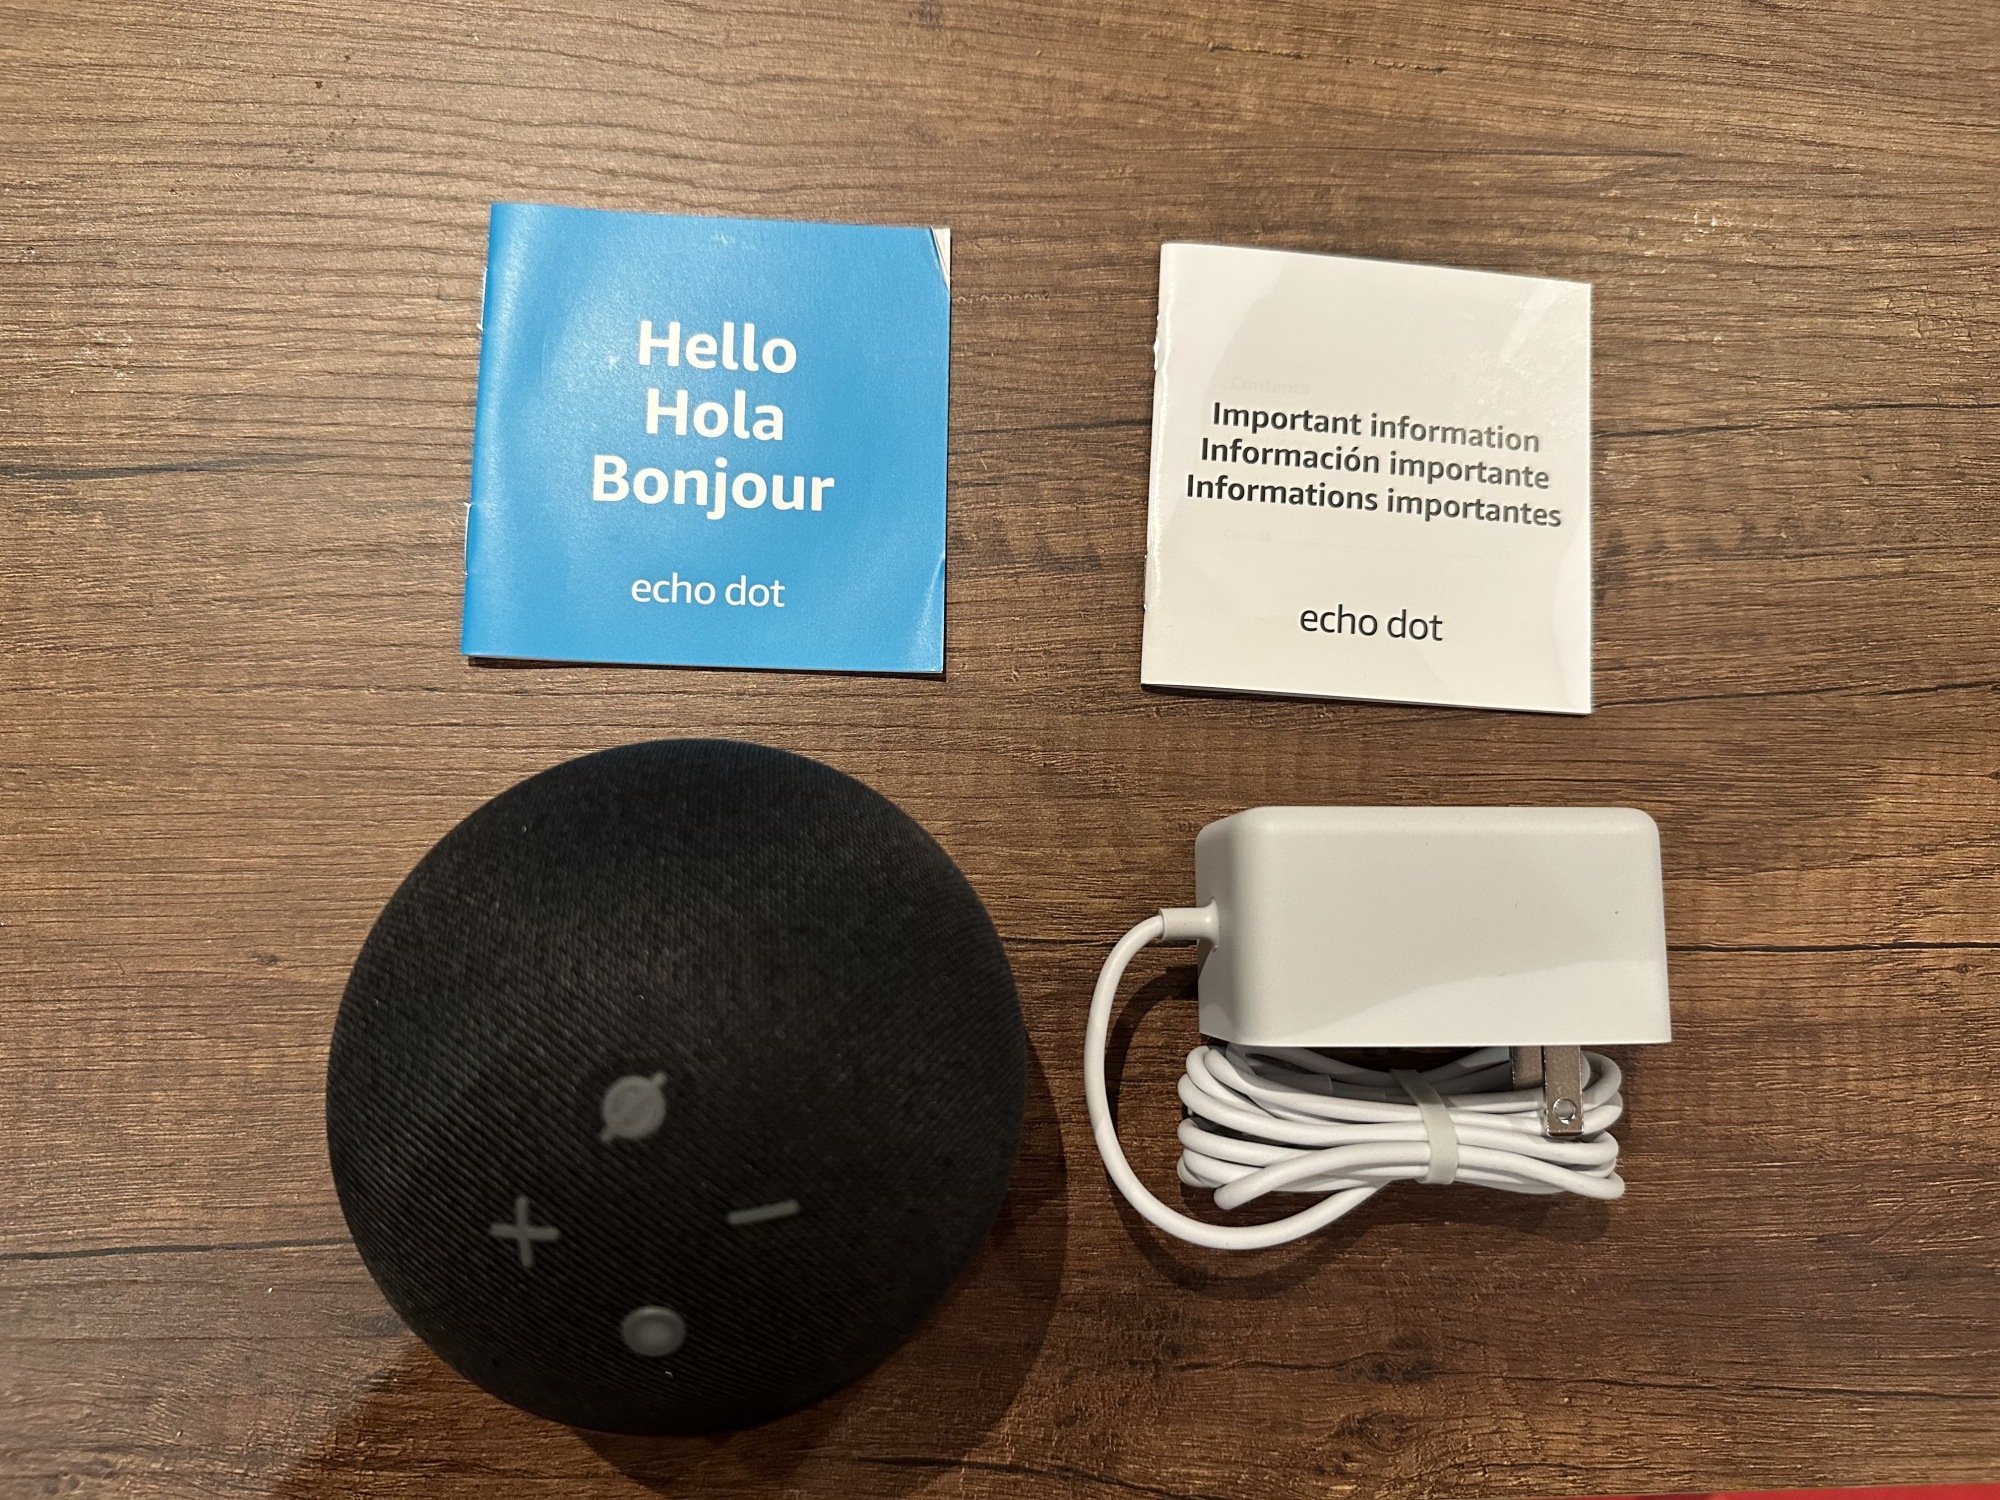 The Amazon Echo Dot resting on a table alongside its cord and two instruction manuals for use